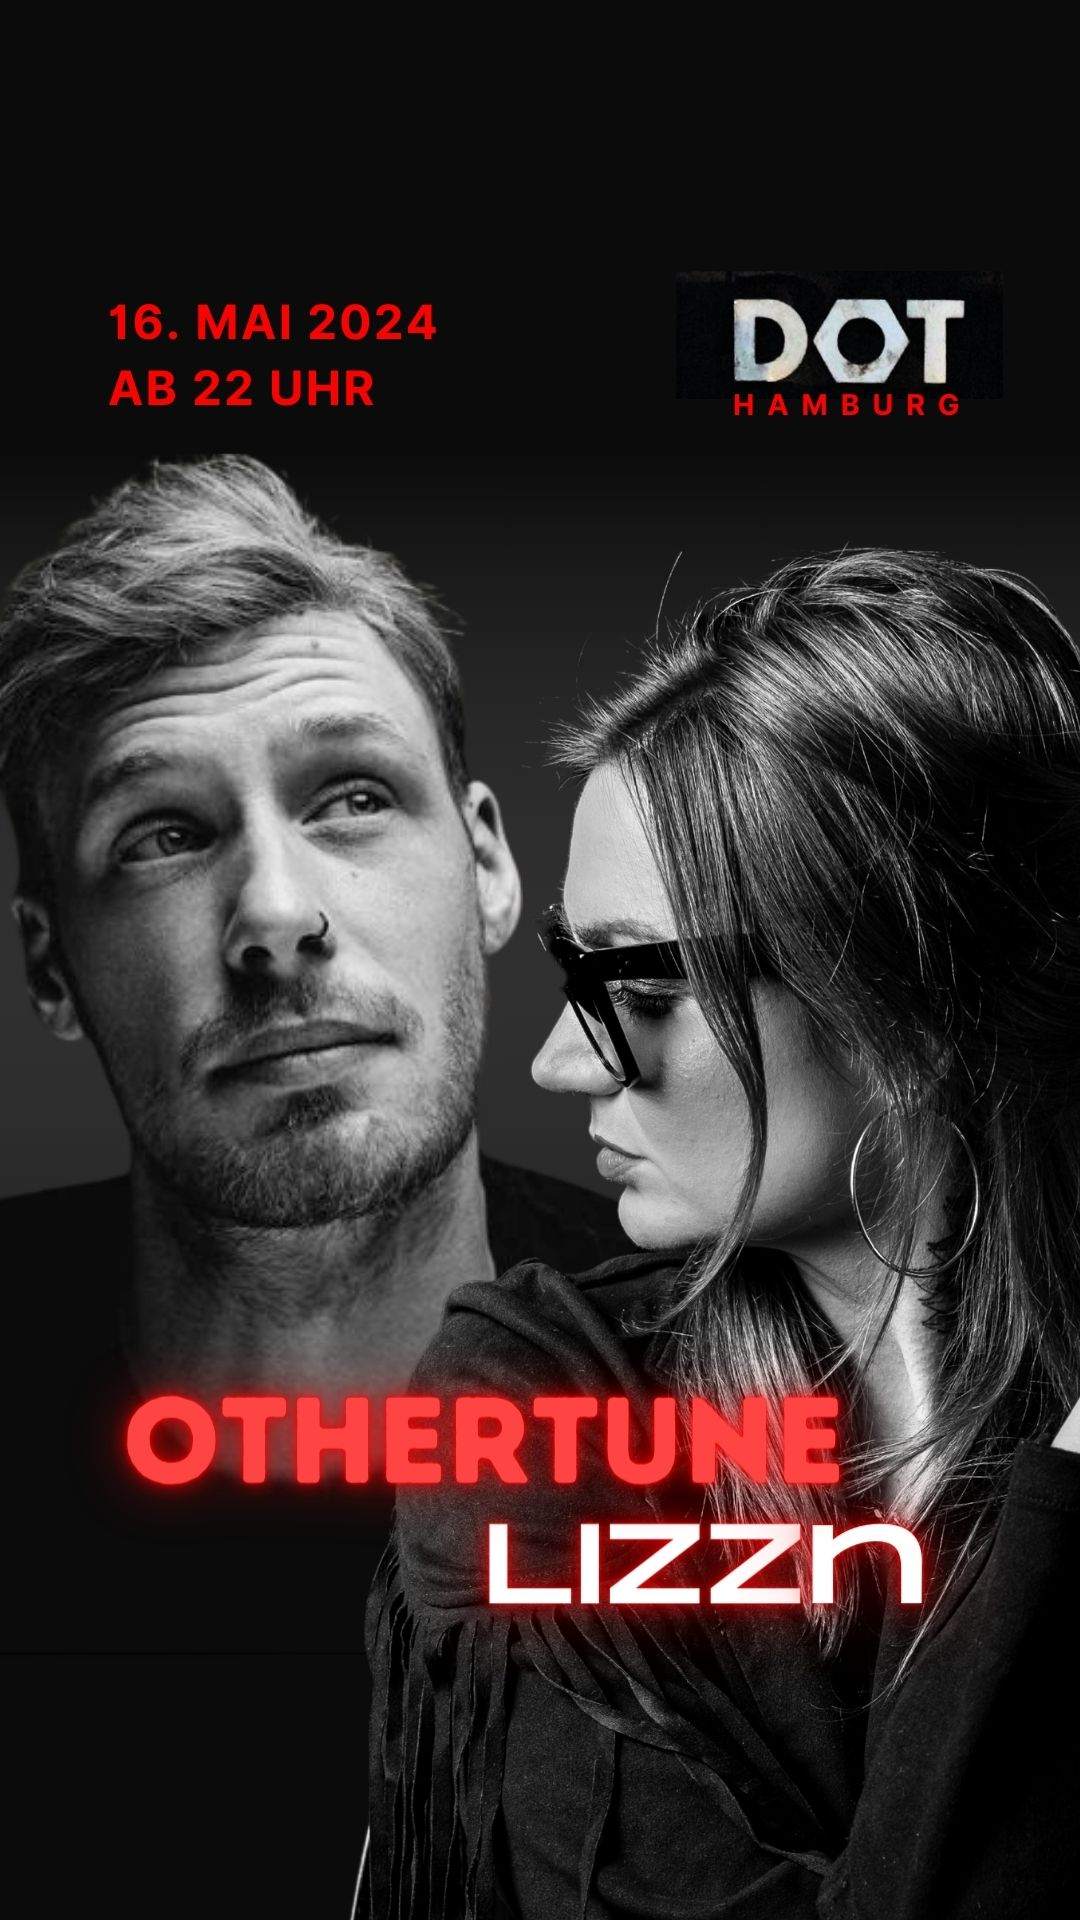 THURSDAYS at DOT with Othertune, LIZZN - Página frontal